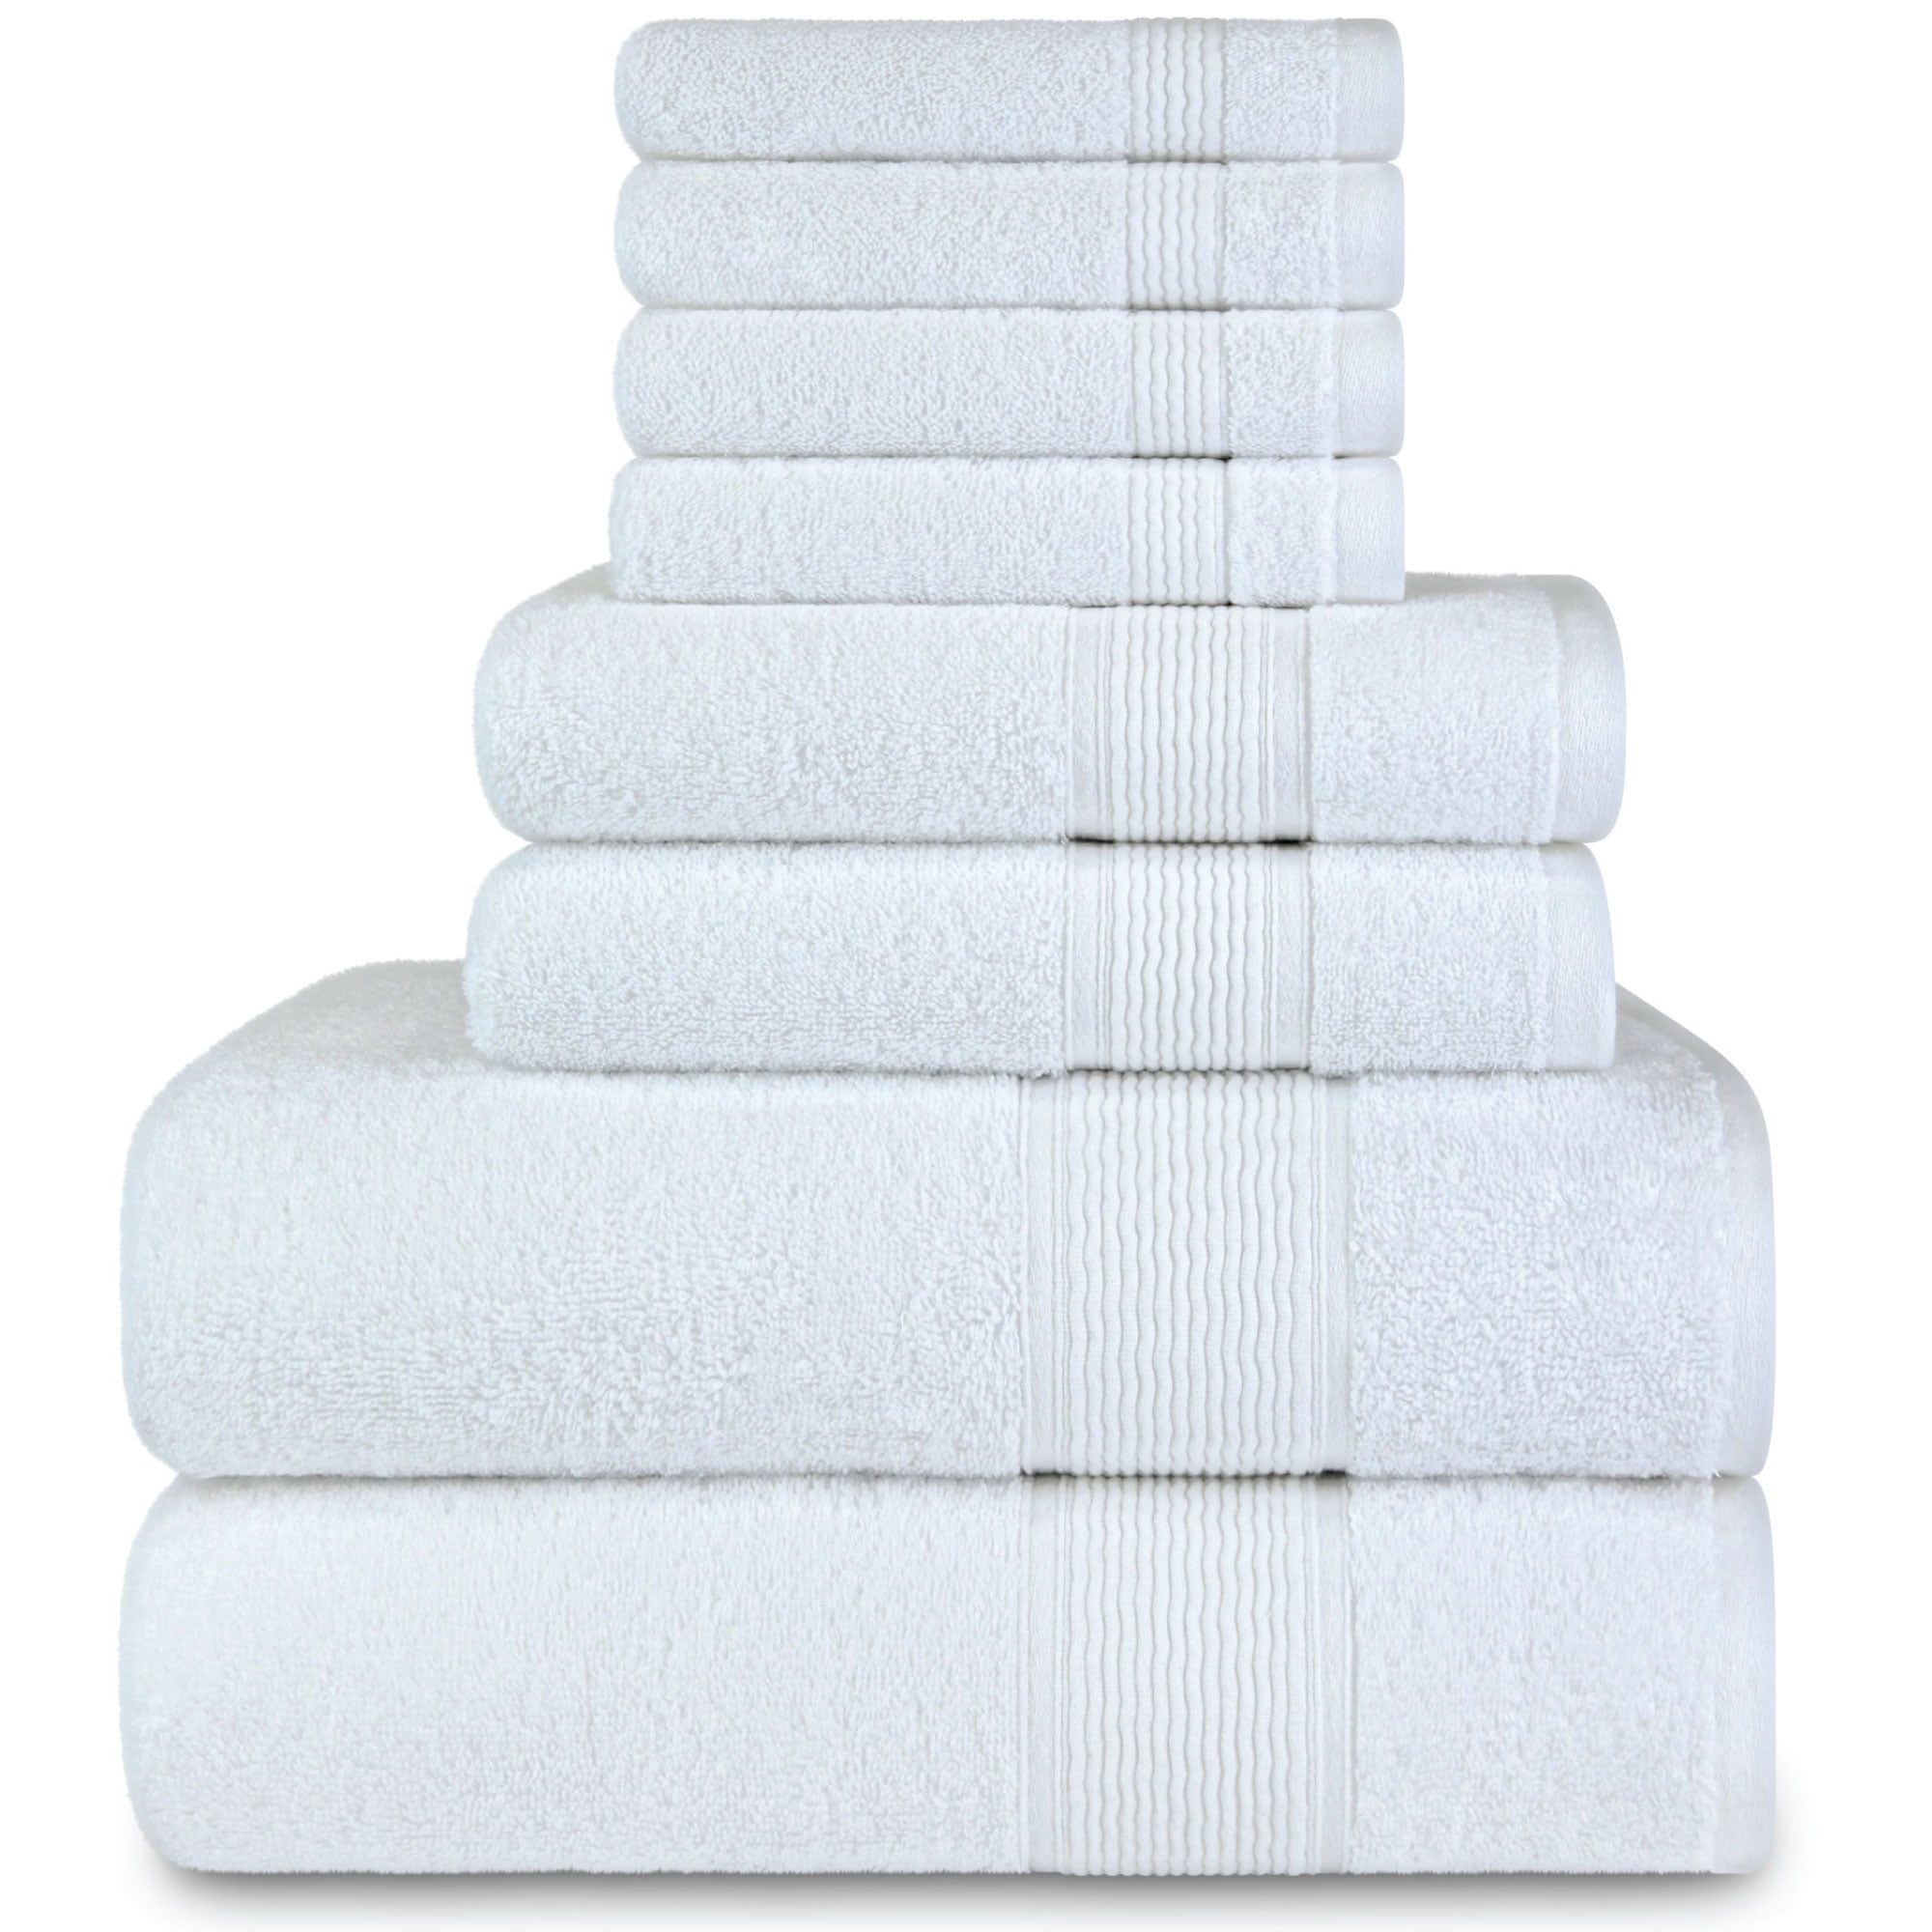 PACK 100% EGYPTIAN EMBED COTTON 600 GSM WHITE SUPER SOFT BATH TOWELS MULTI 